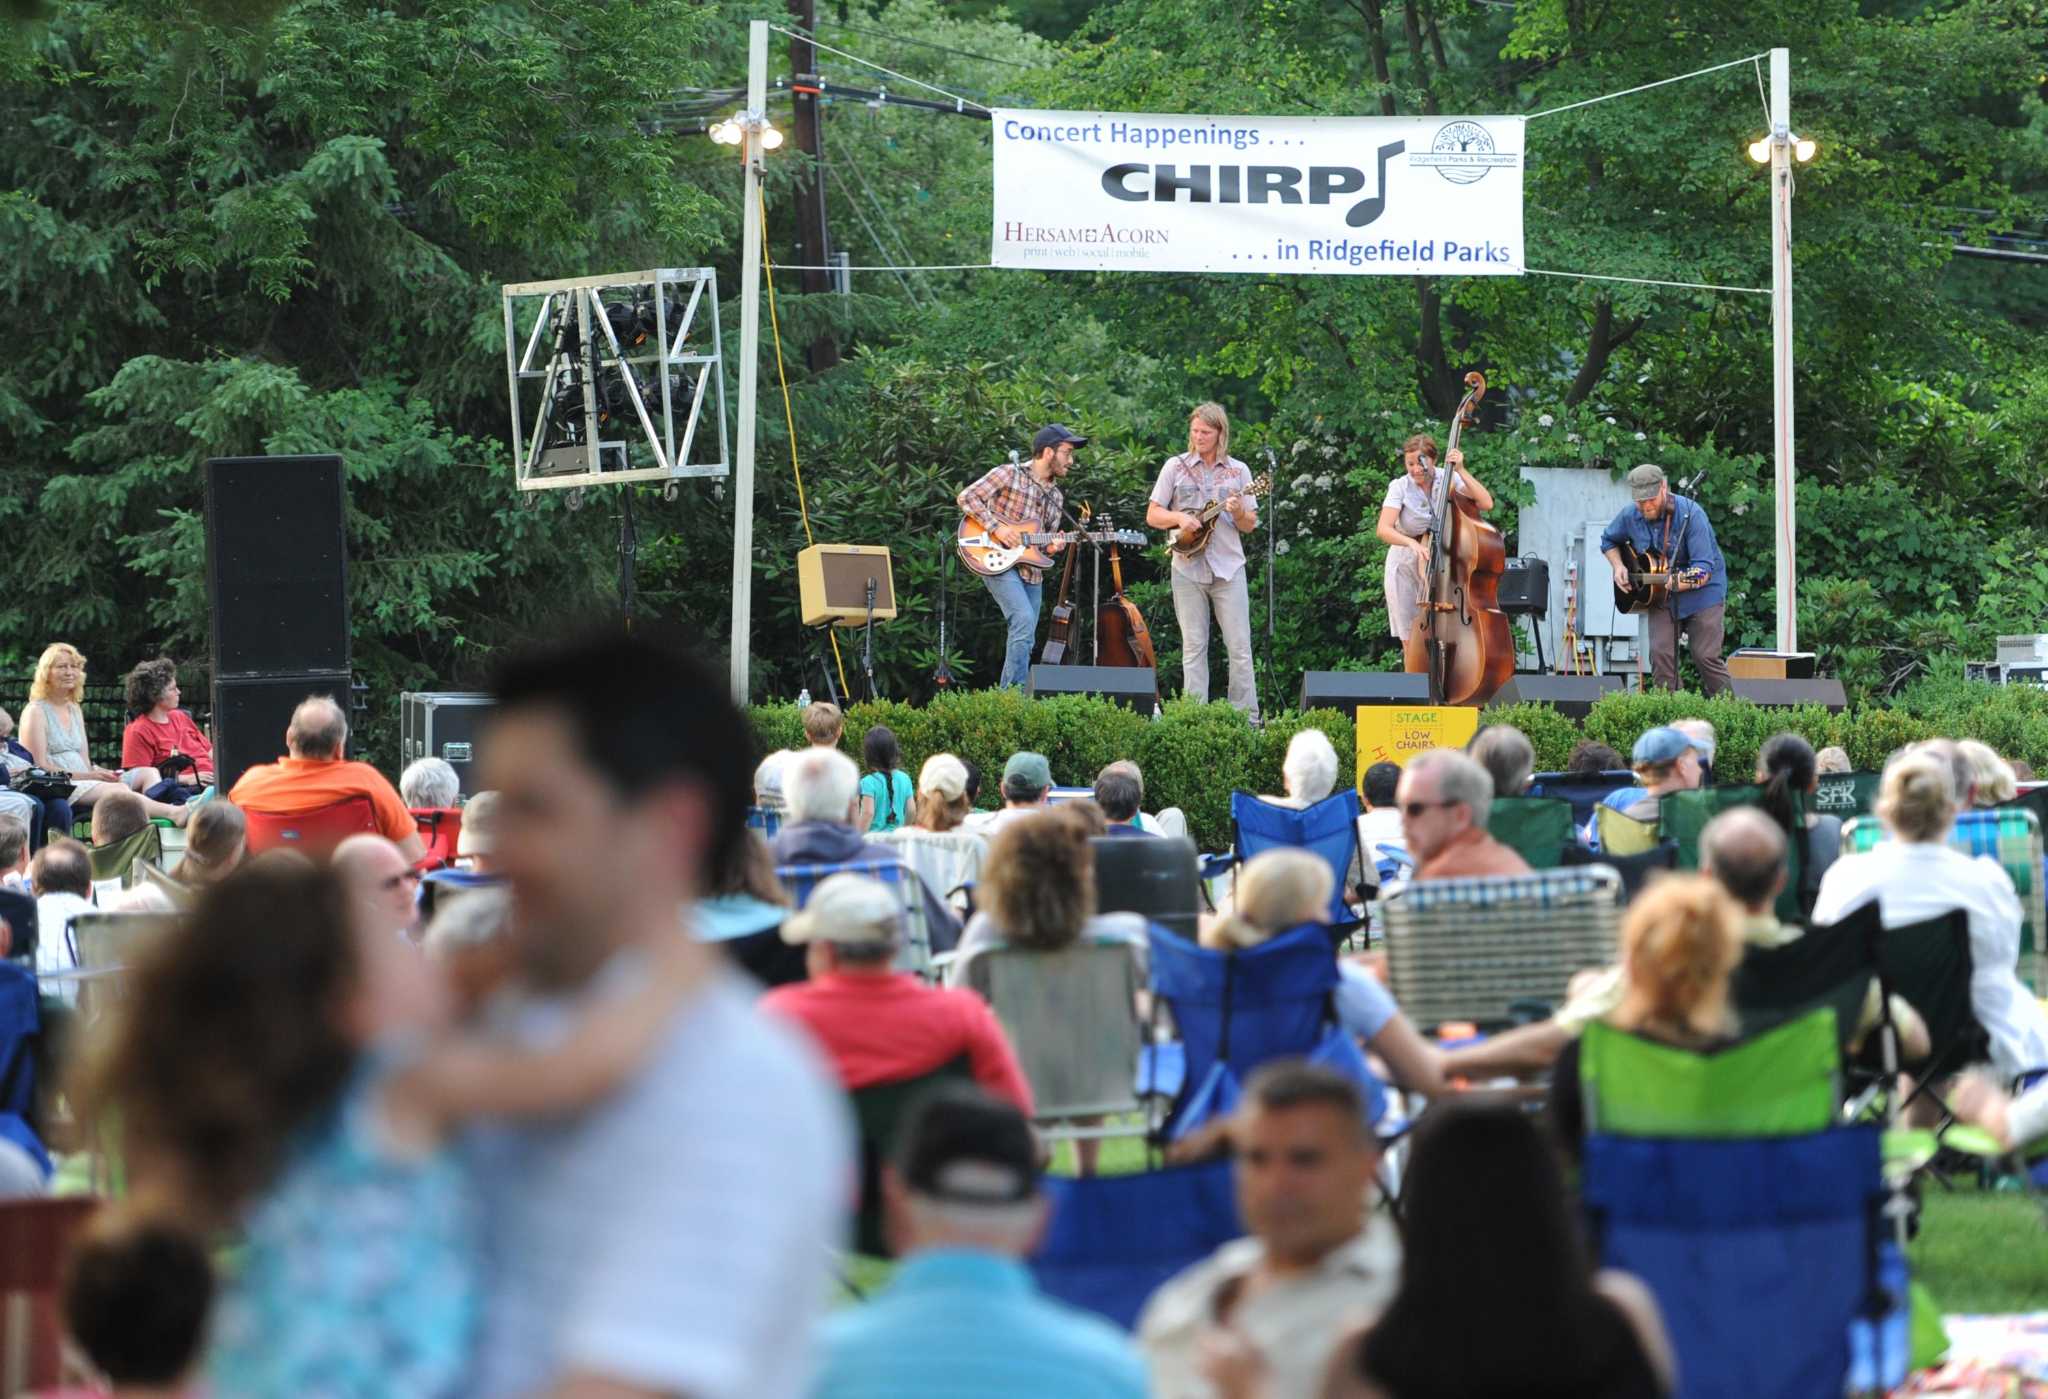 Concerts Happening in Ridgefield Parks (CHIRP) has new parking rules